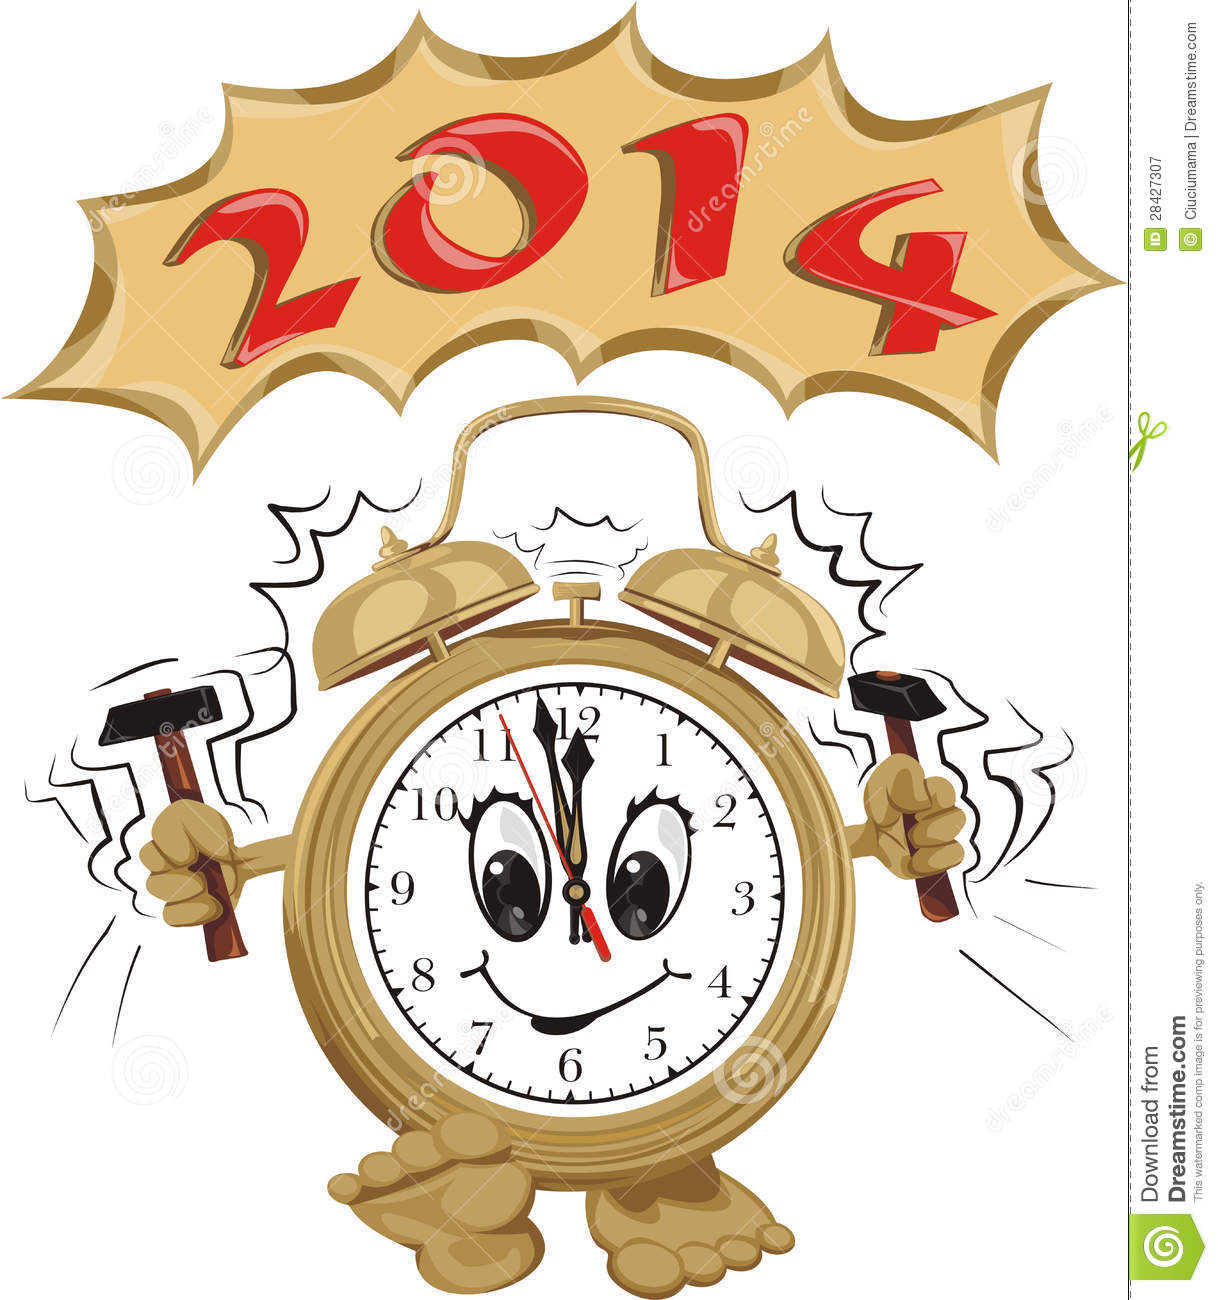 Happy New Year 2014 Royalty Free Stock Photography   Image  28427307